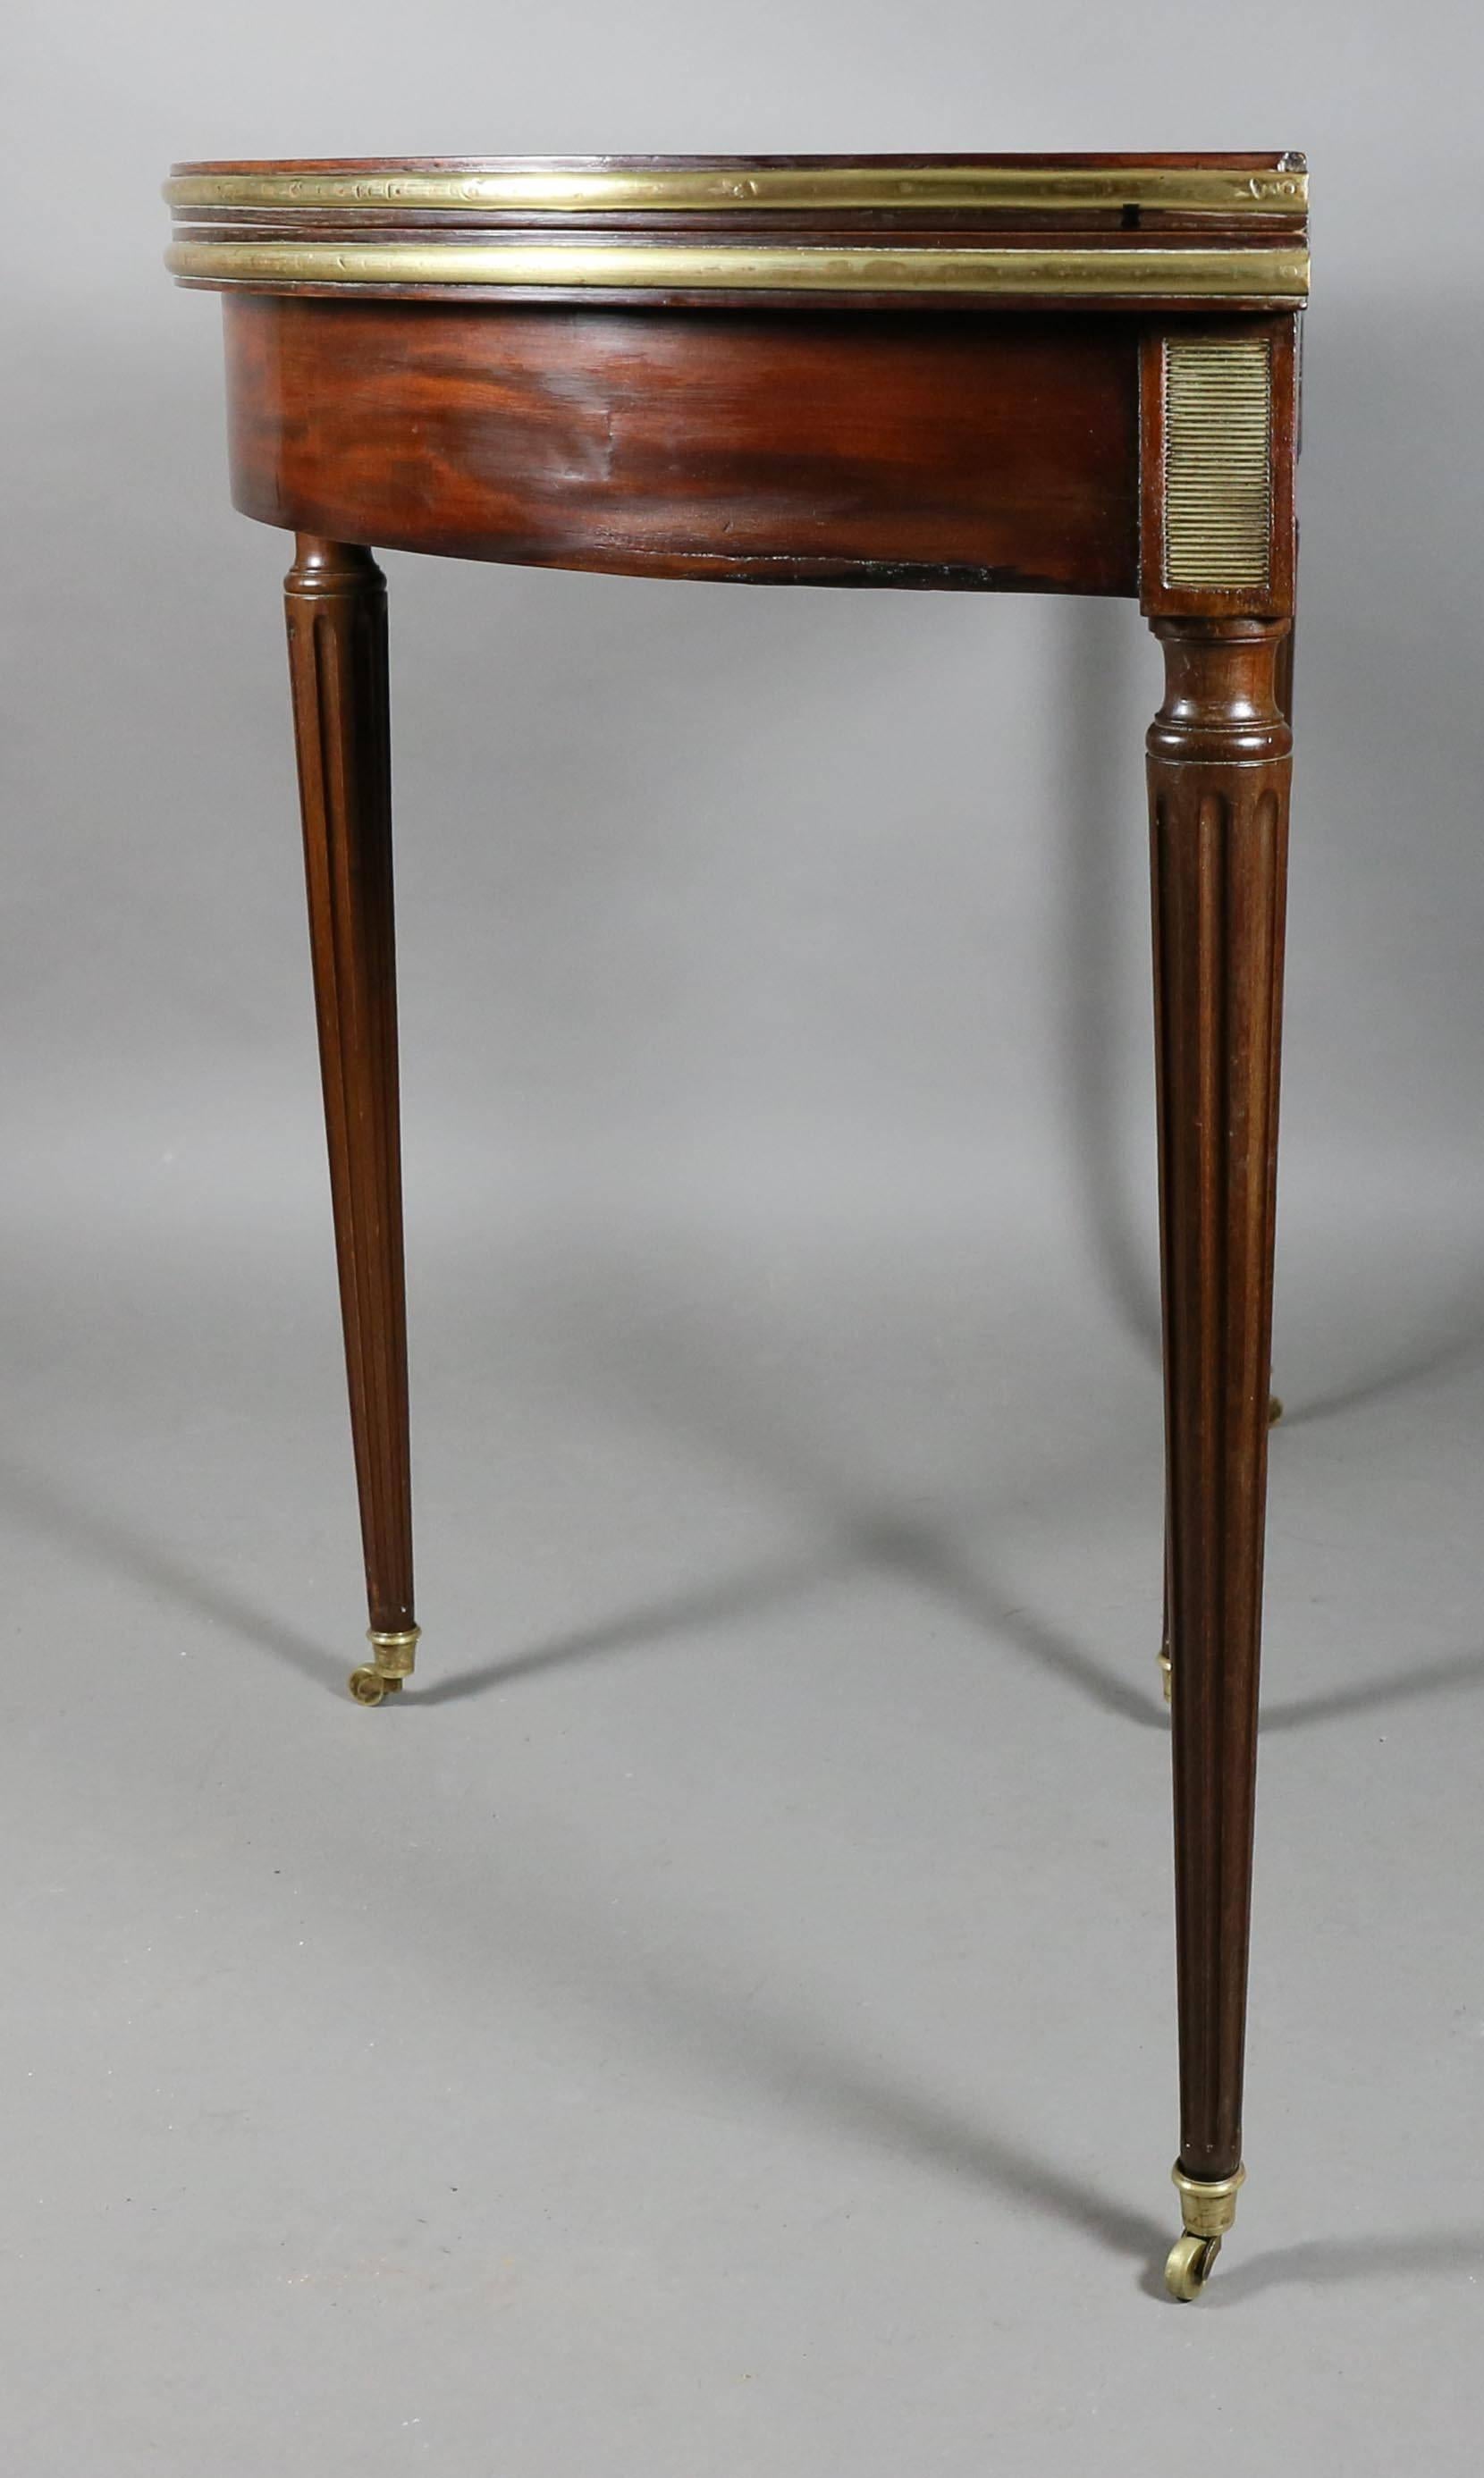 Early 20th Century Directoire Style Mahogany and Brass Mounted Console or Games Table